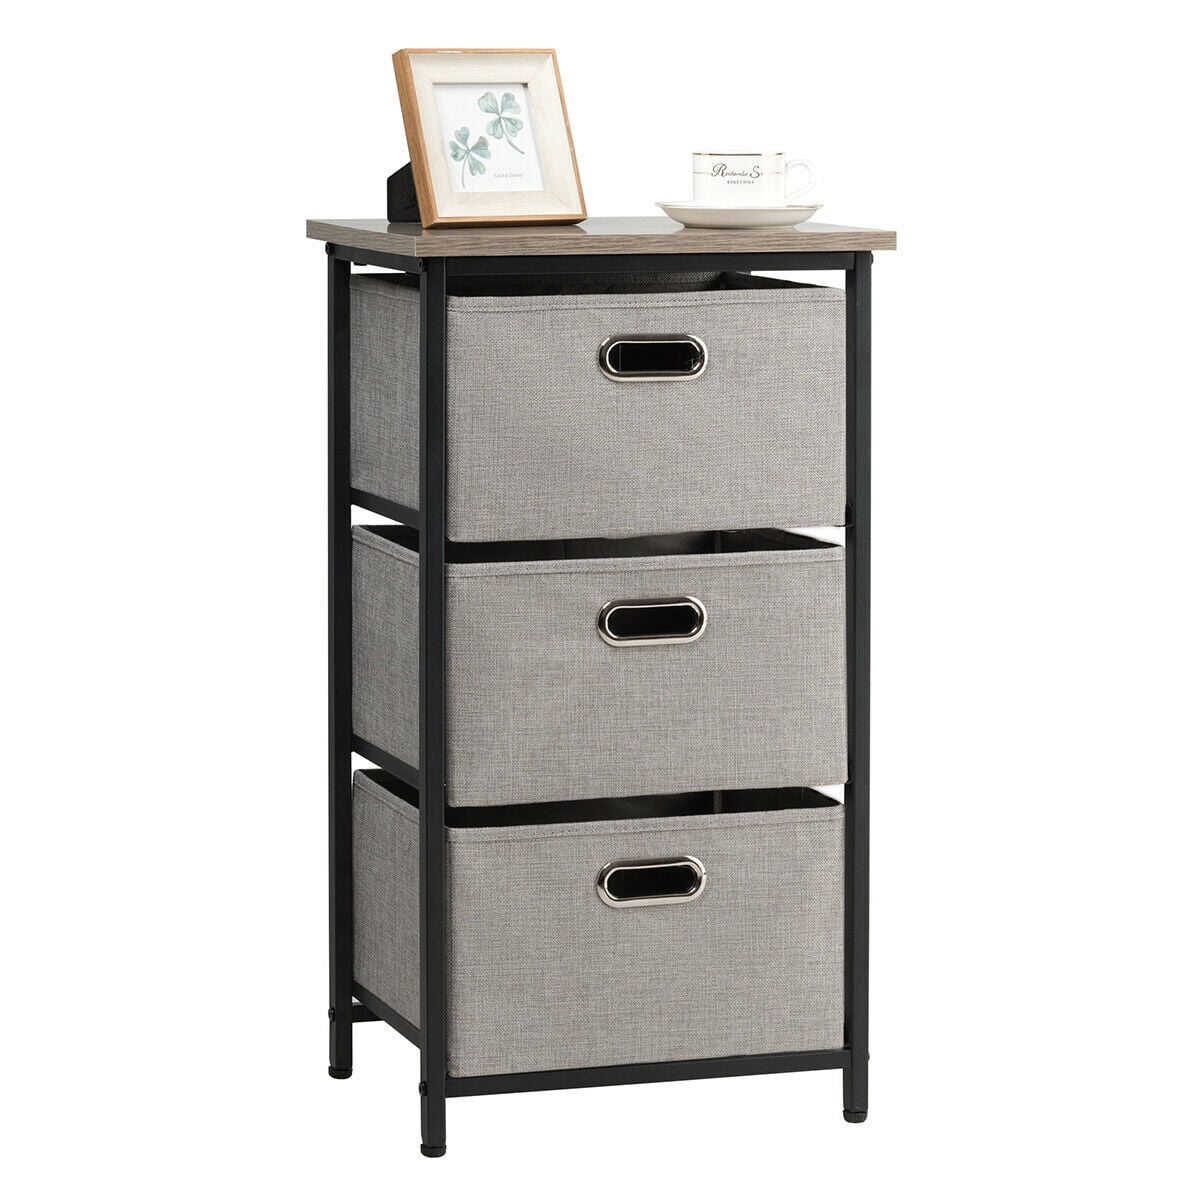 MULISOFT Fabric Dresser with 3 Drawer Rolling Storage, Foldable and Easy to Assemble Organizer,Gray, Girl's, Size: Large